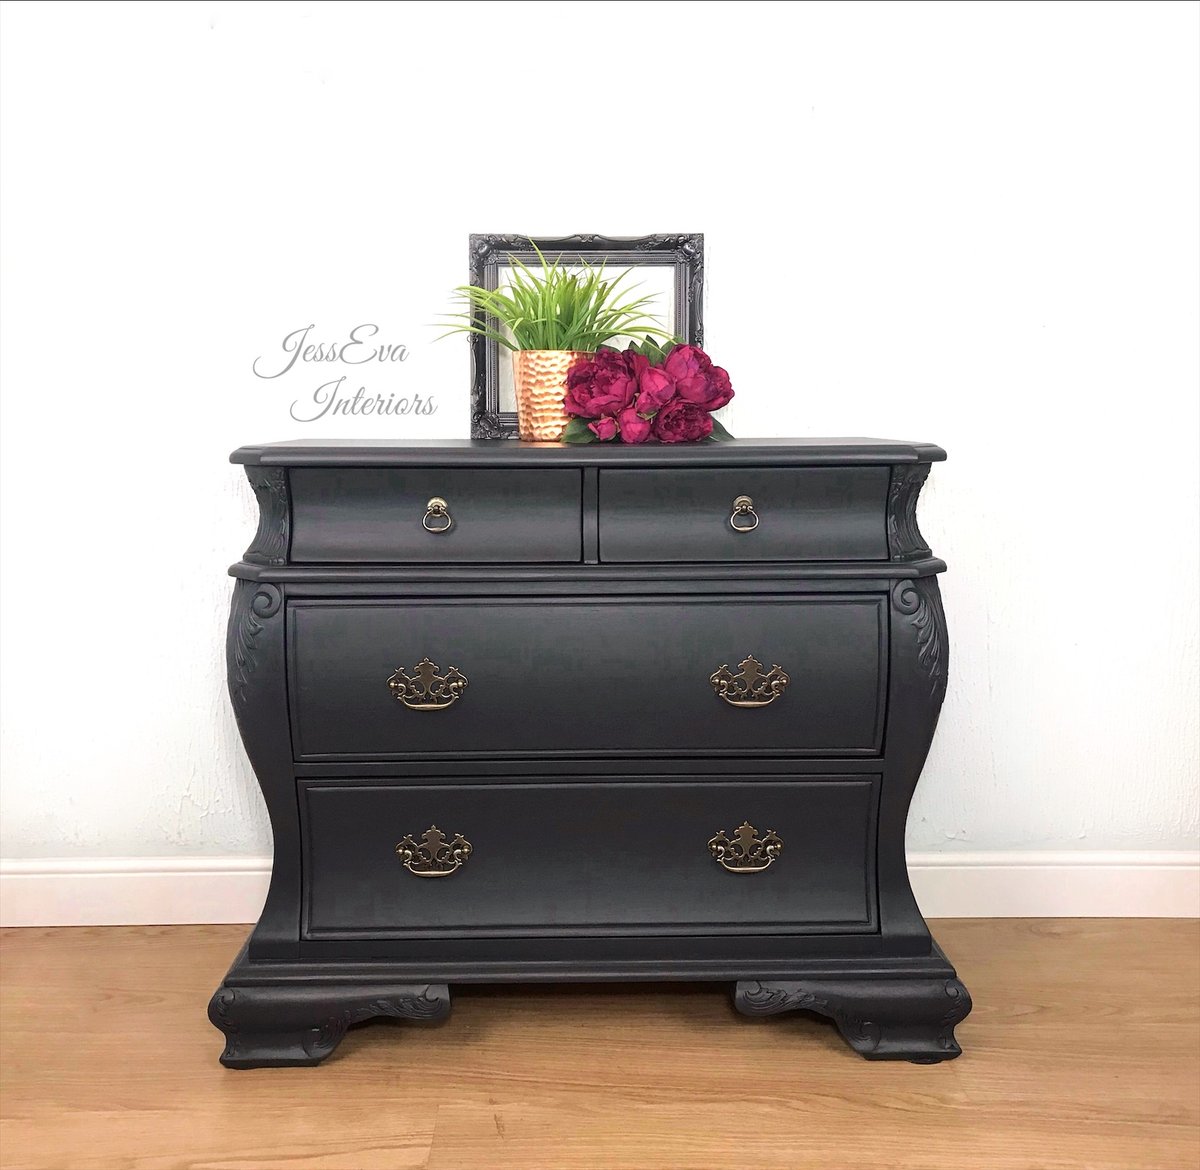 Carved CHEST OF DRAWERS painted in dark grey/charcoal Fusion Mineral paint 